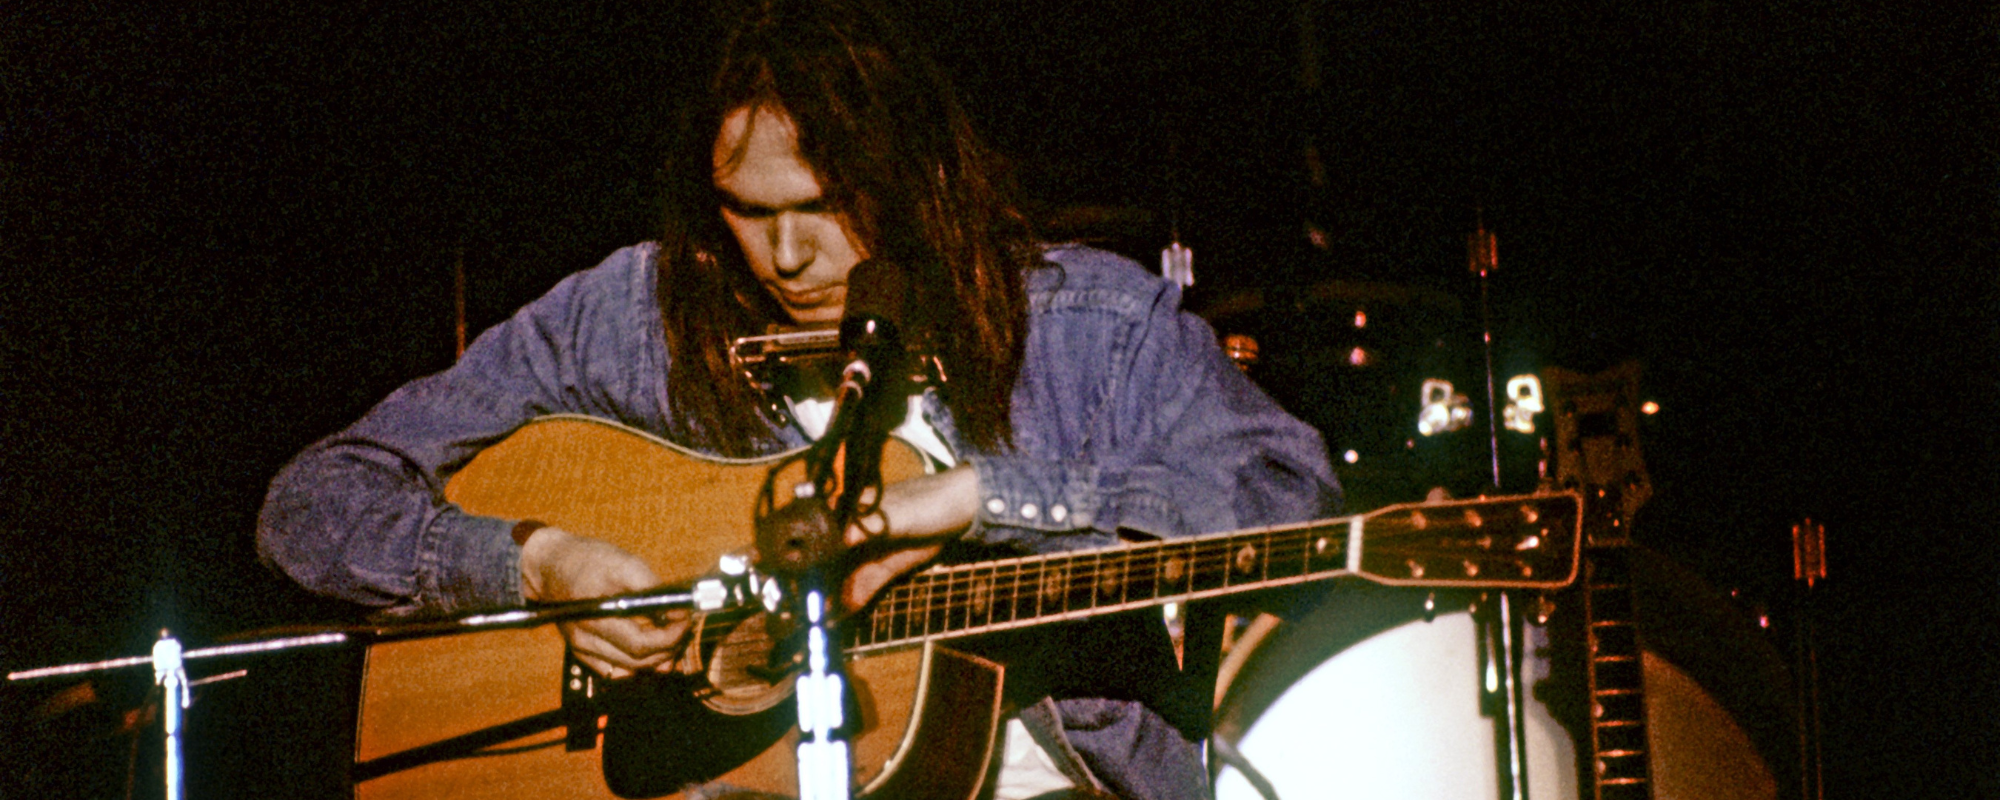 The Meaning Behind Neil Young’s “Old Man,” a Song Born from Back Pain and a Jeep Ride